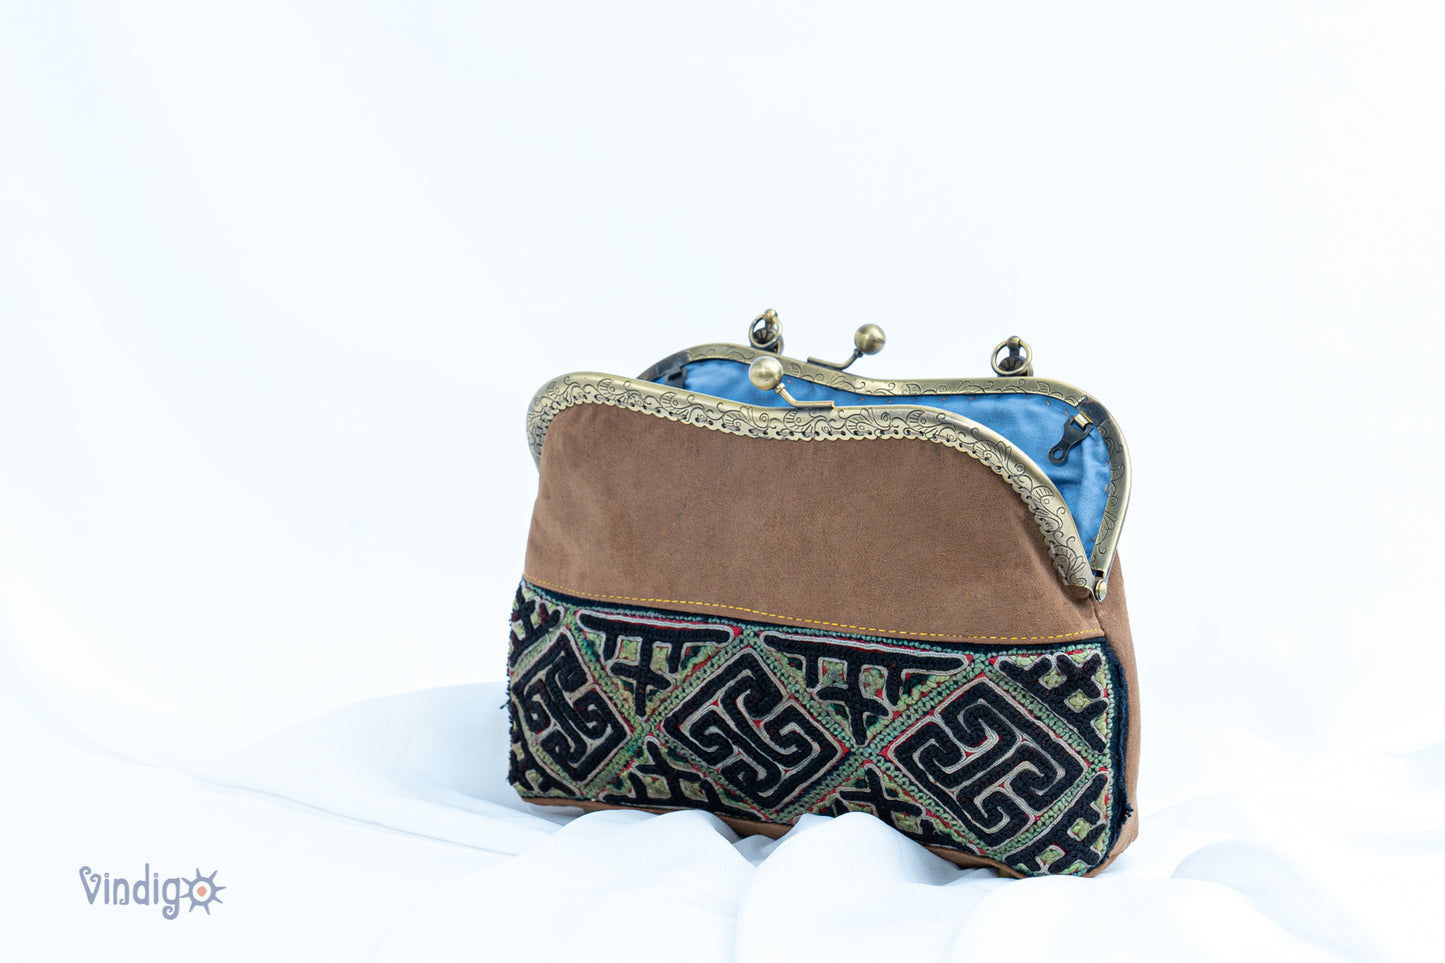 Brown Suede leather bag with vintage tribal embroidery and copper-binding